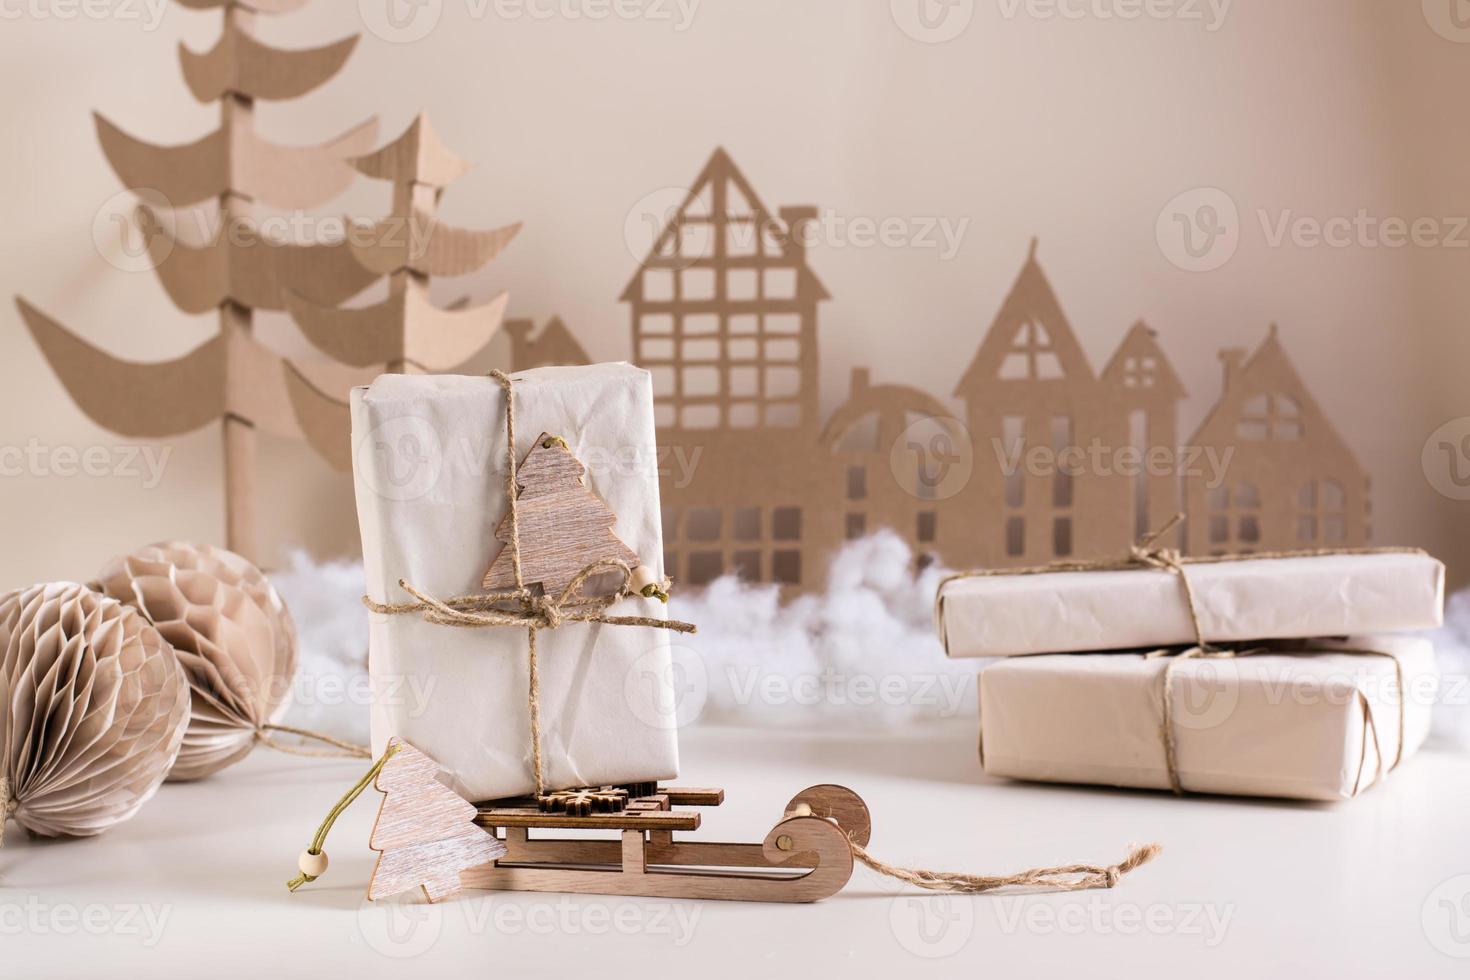 DIY Christmas home decor - gift in craft paper on a sledge, cardboard tree and house. Handmade photo